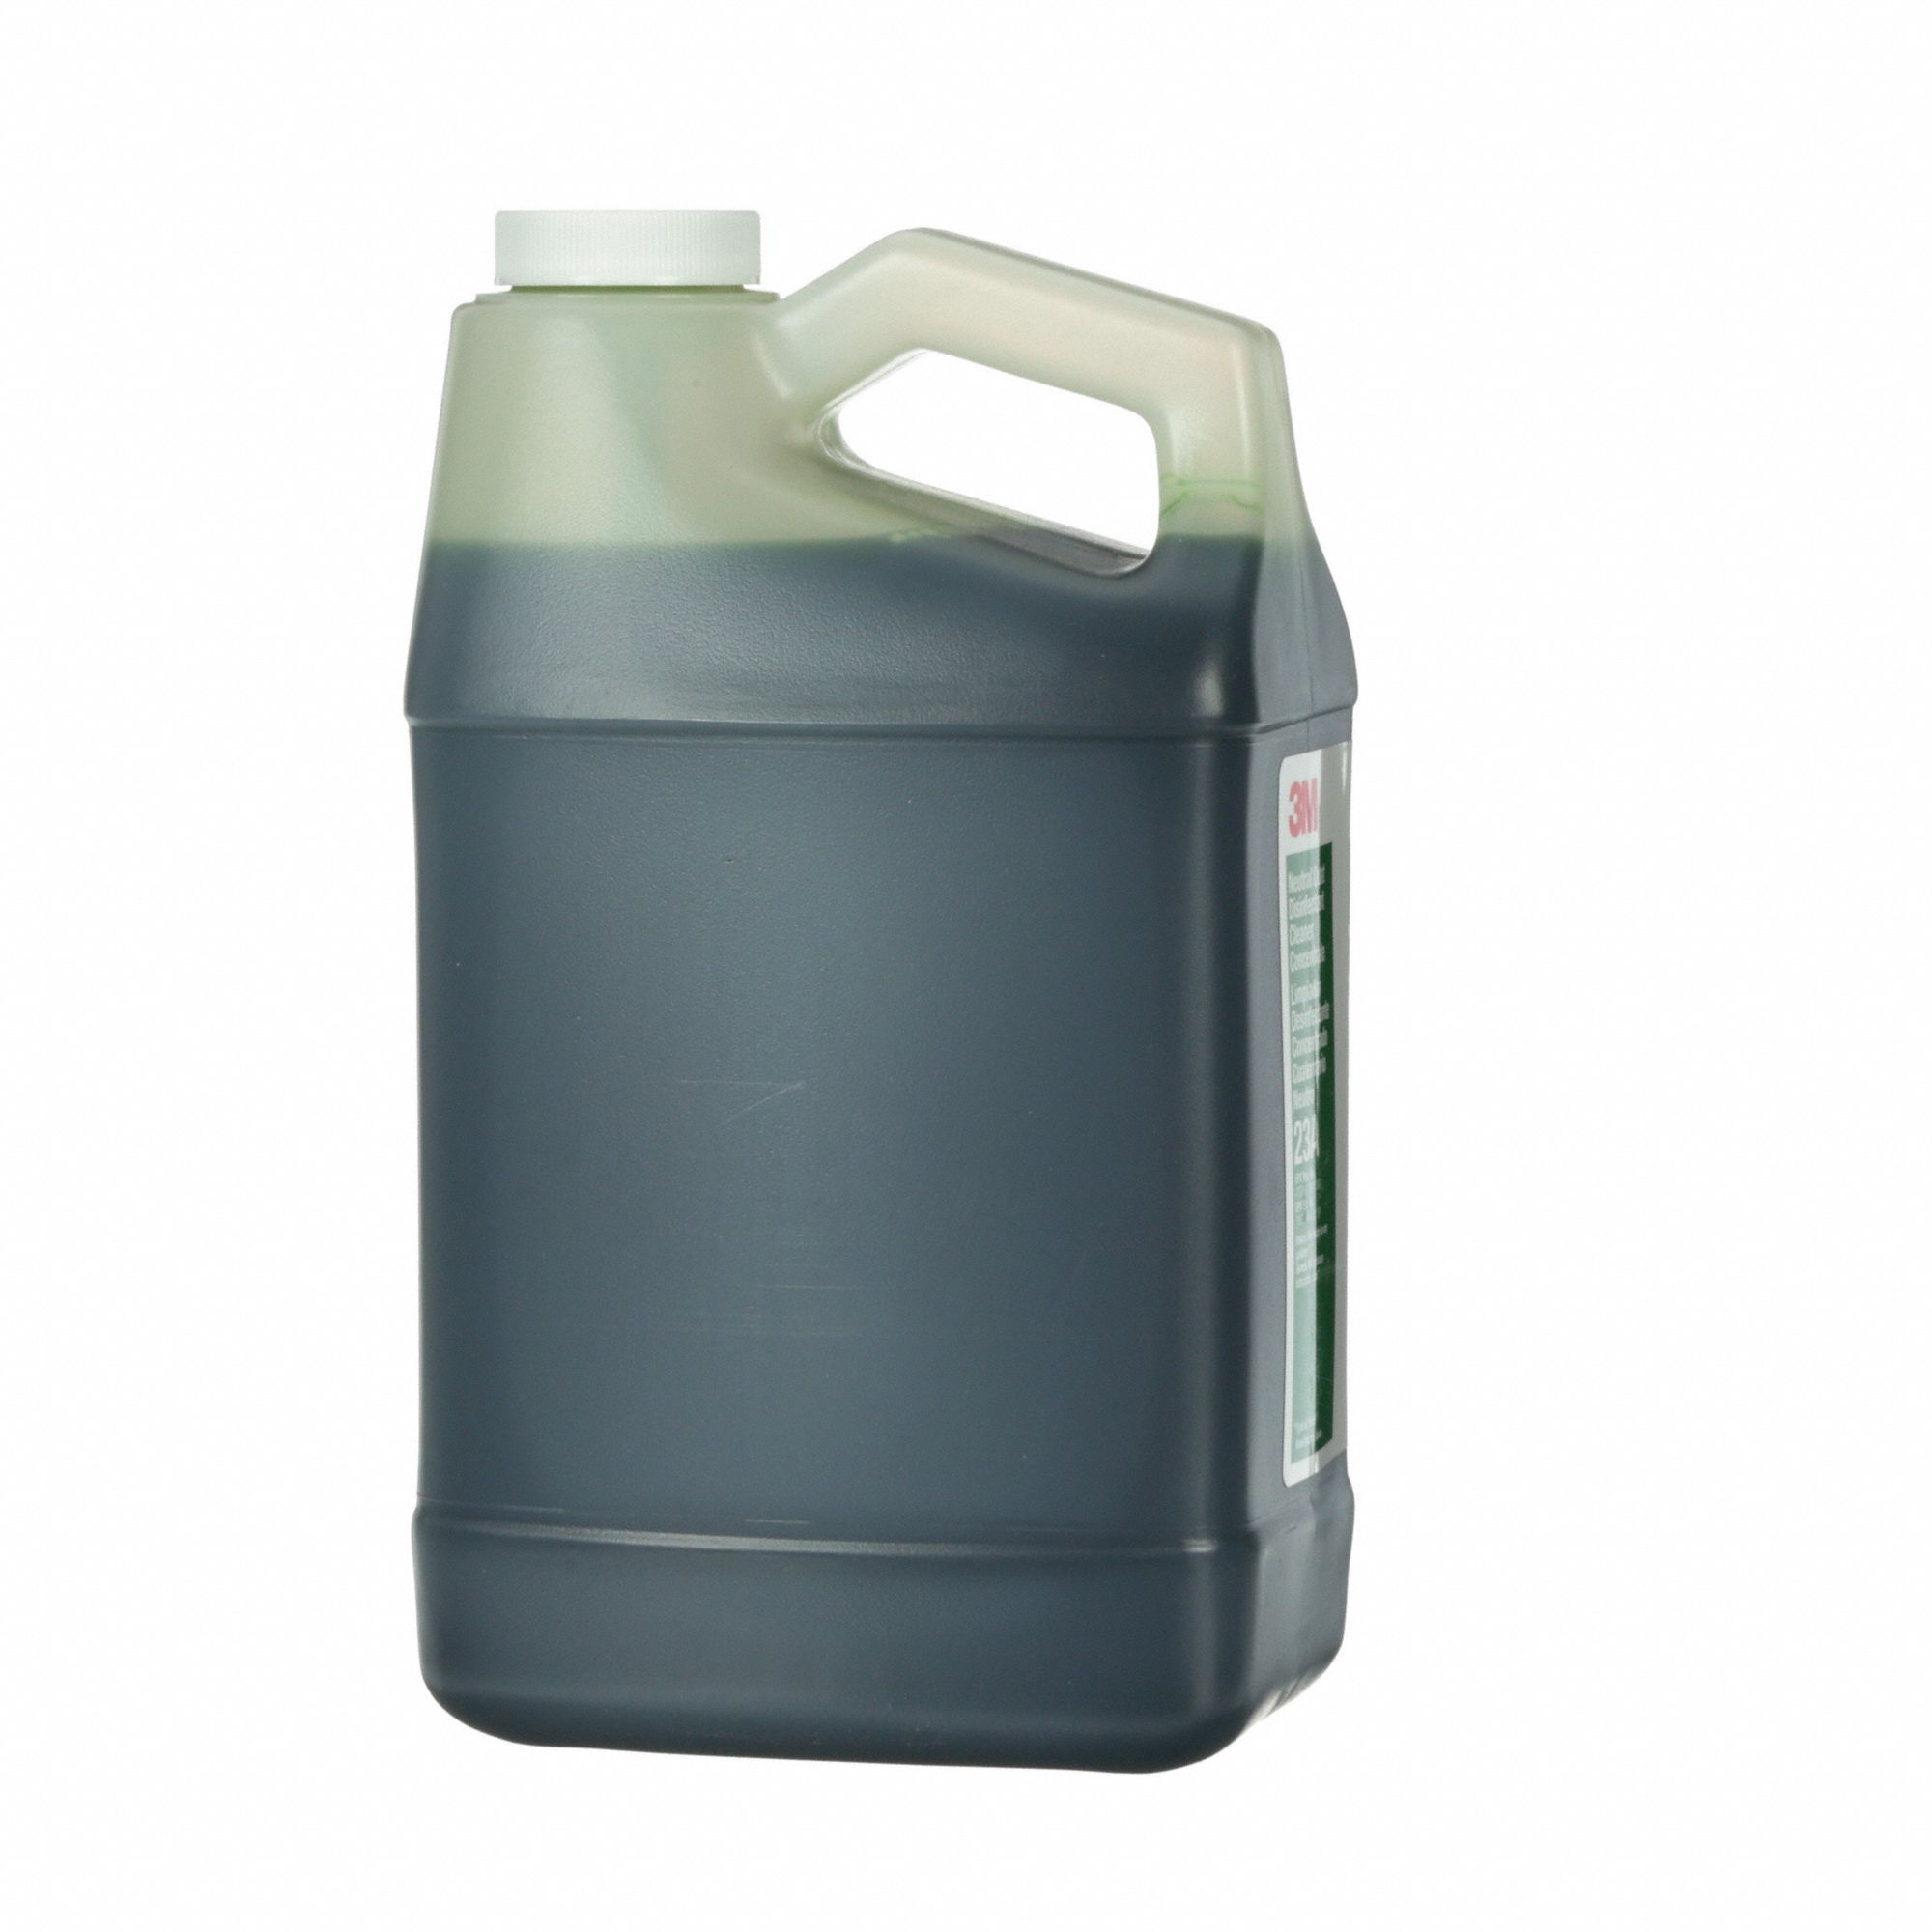 3M™ MBS Disinfectant Cleaner Concentrate 42H, Gray Cap, 2 Liter, 6/case